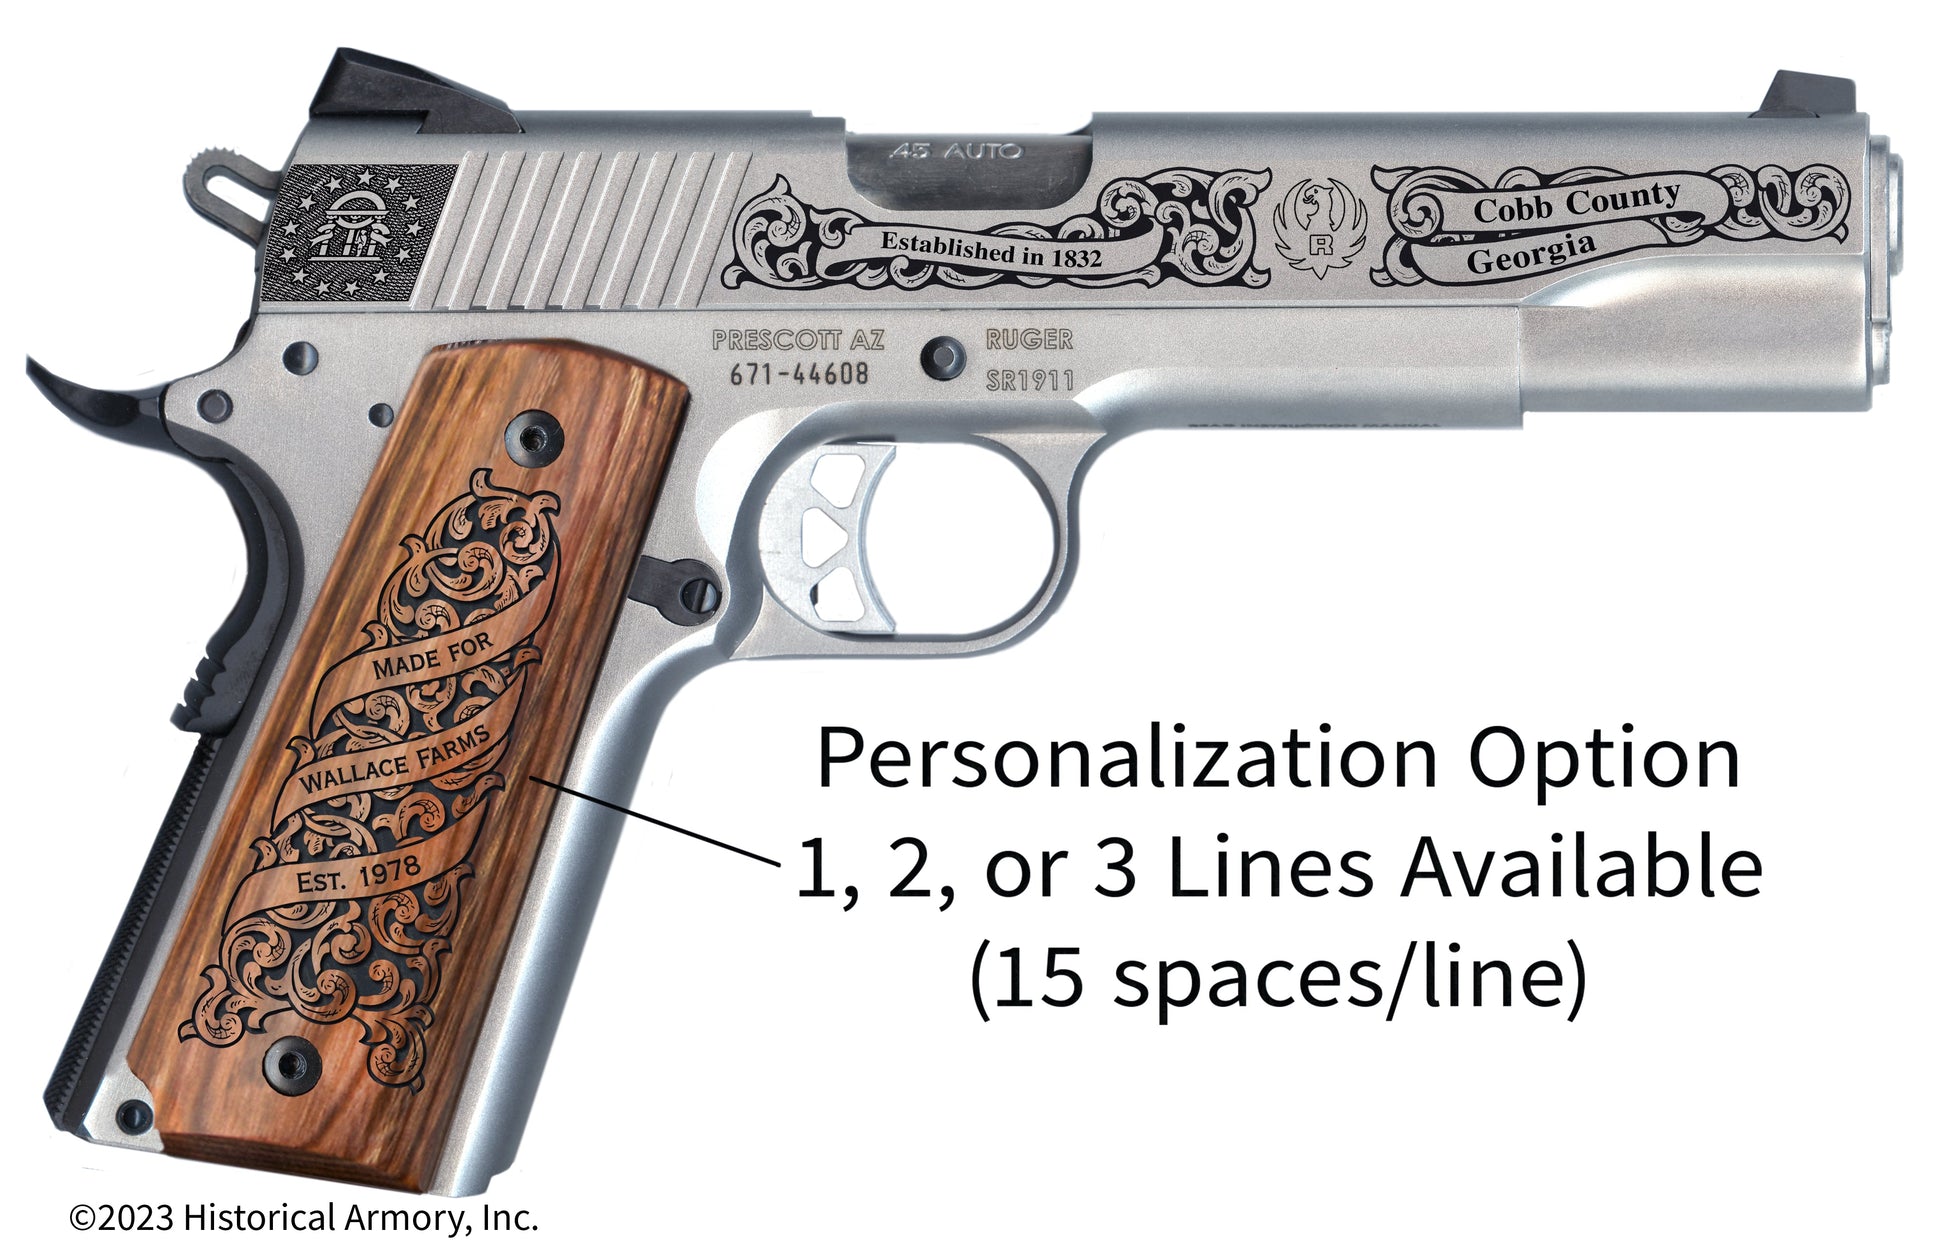 Cobb County Georgia Personalized Engraved .45 Auto Ruger 1911